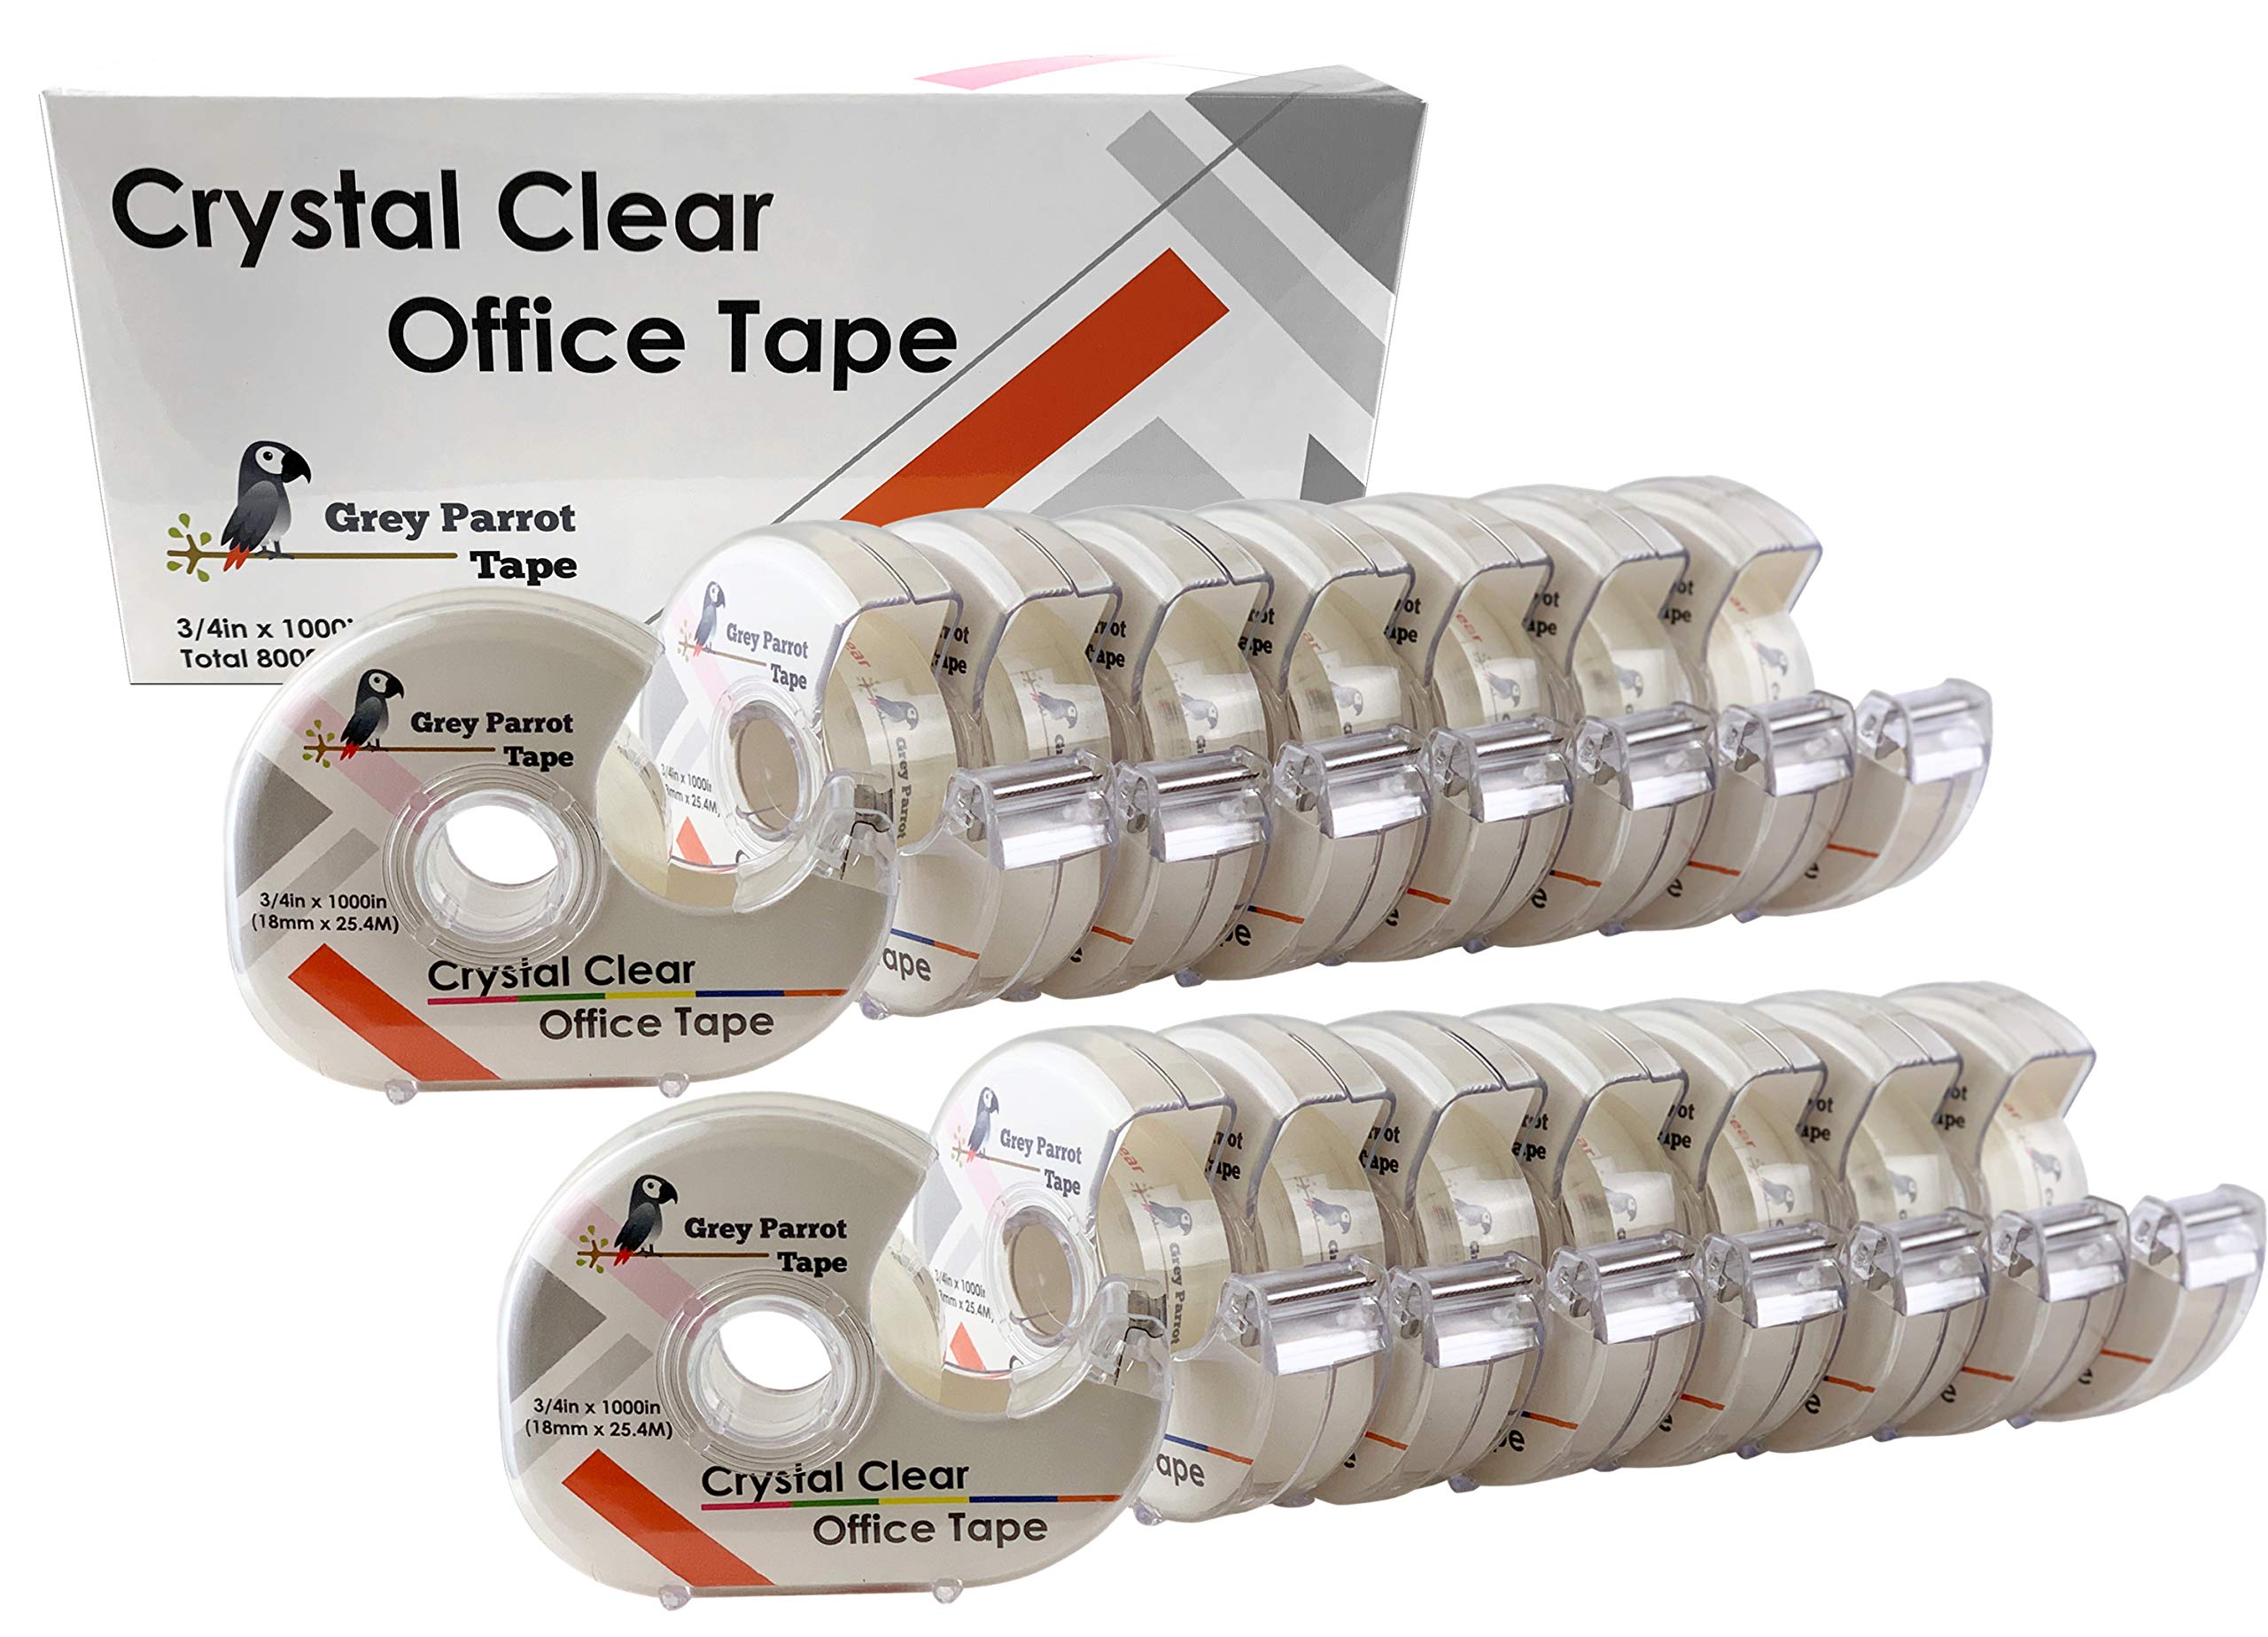 Greyparrot Office Tape Clear Refill Rolls + Dispenser(16 Pack),(3/4” X 1000in/pack). for Craft Jobs, Gift Wrapping, Office Work Clear(Transparent) Glossy Finish, Refillable (16000 inch/Total)